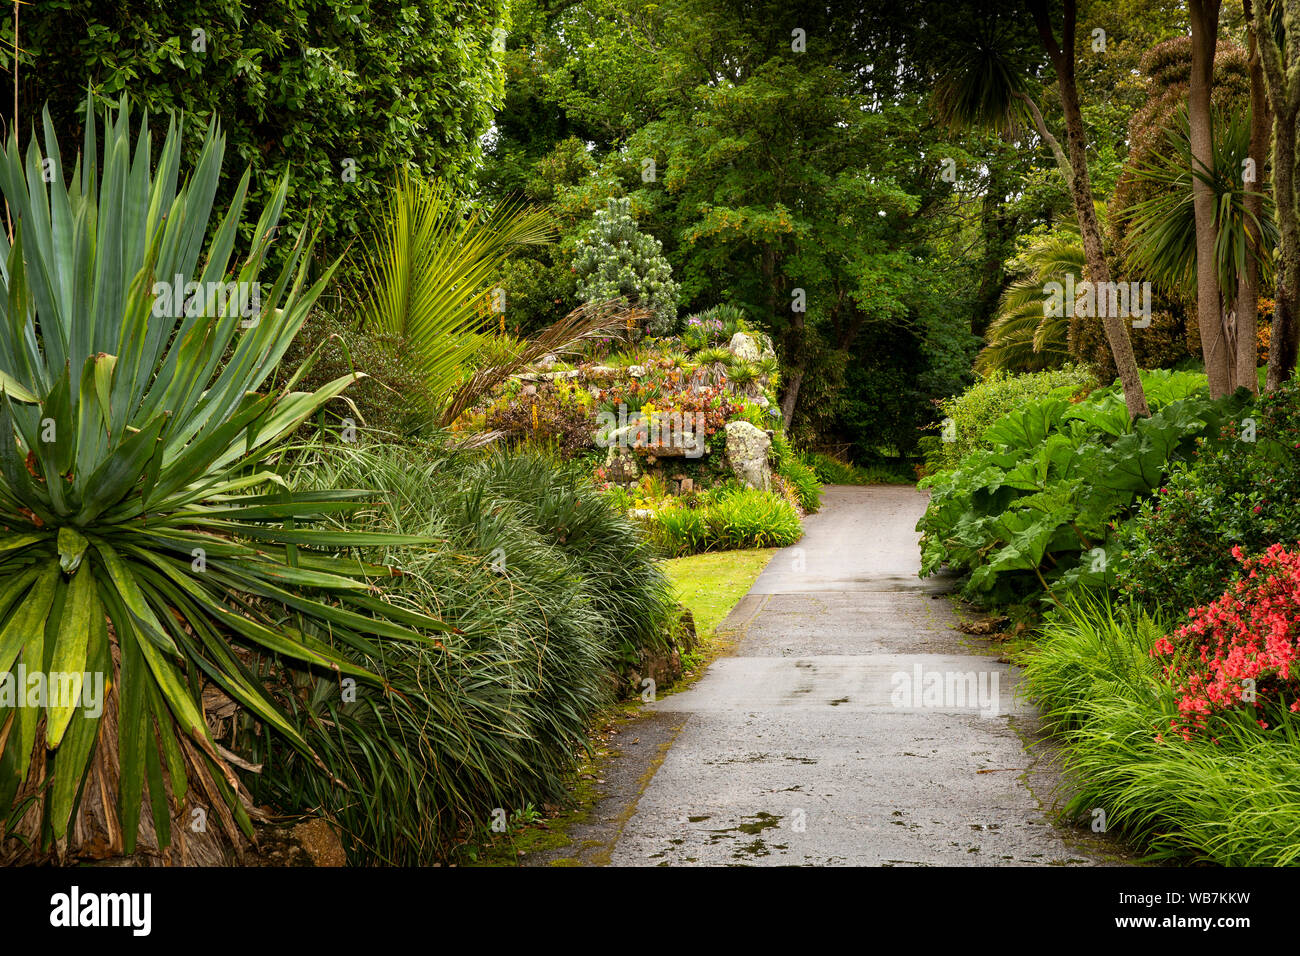 UK, England, Scilly Islands, Tresco, public footpath through grounds of the Abbey, private home beside gardens Stock Photo